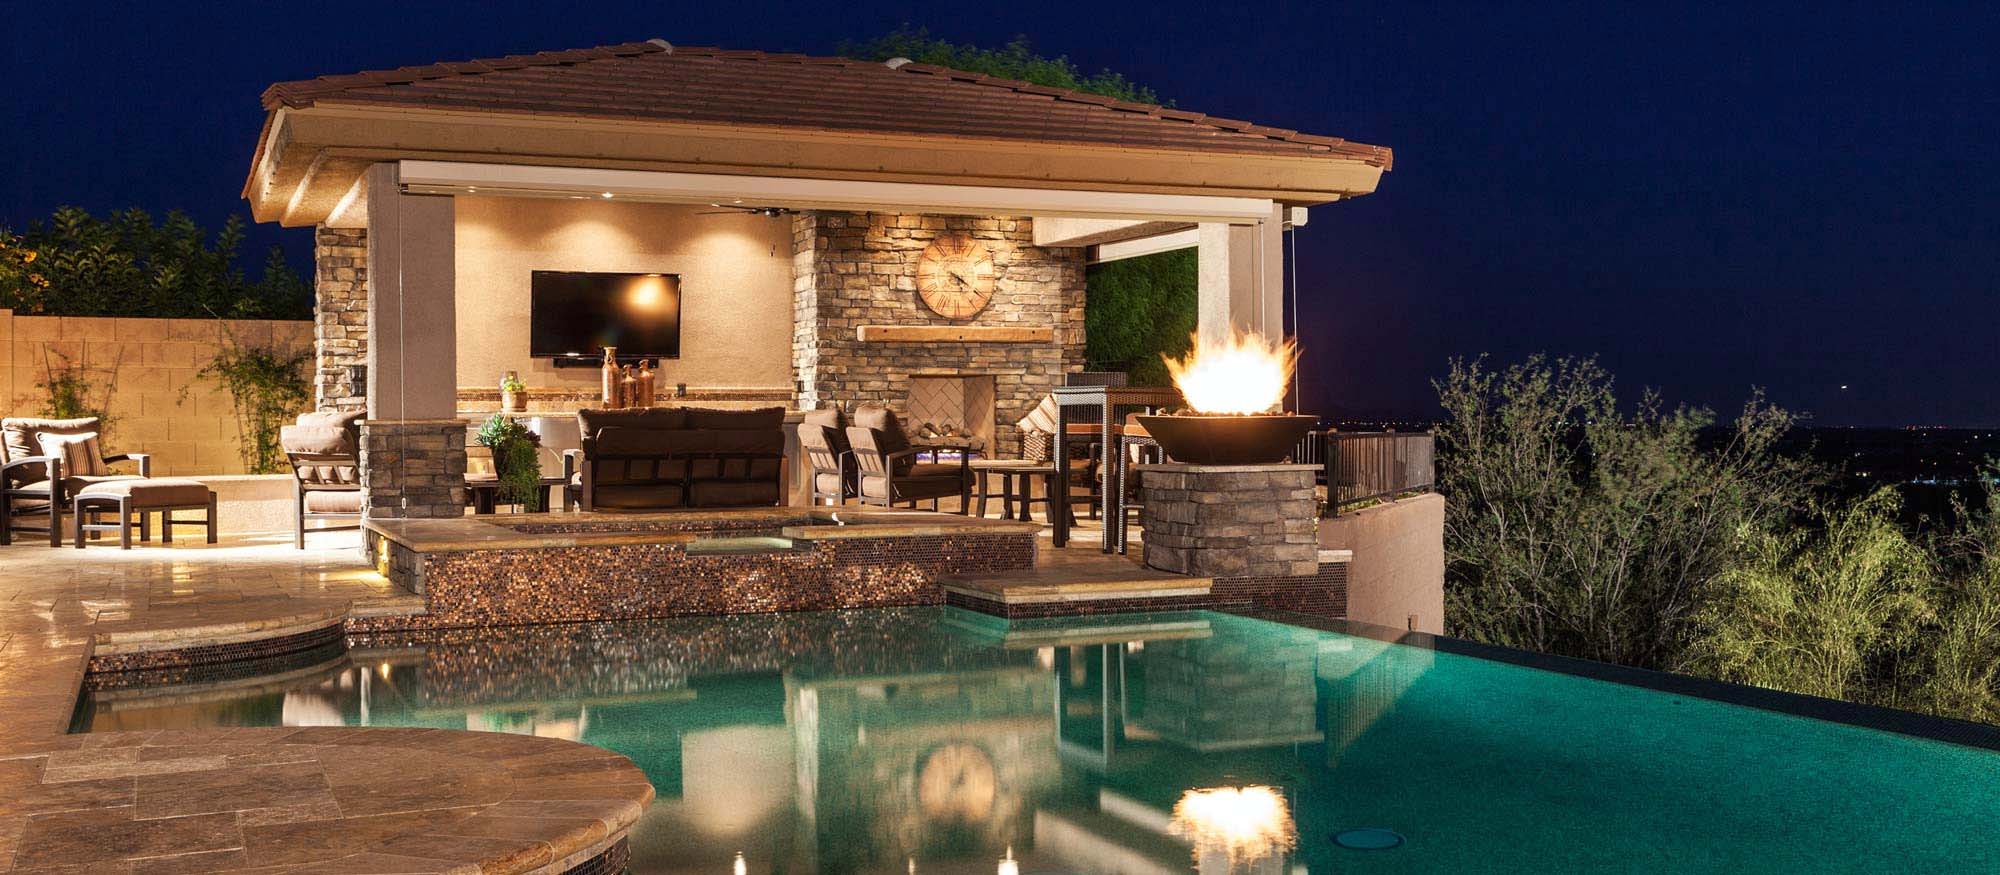 small pool house designs real stone chimney with outdoor fireplace stone patio